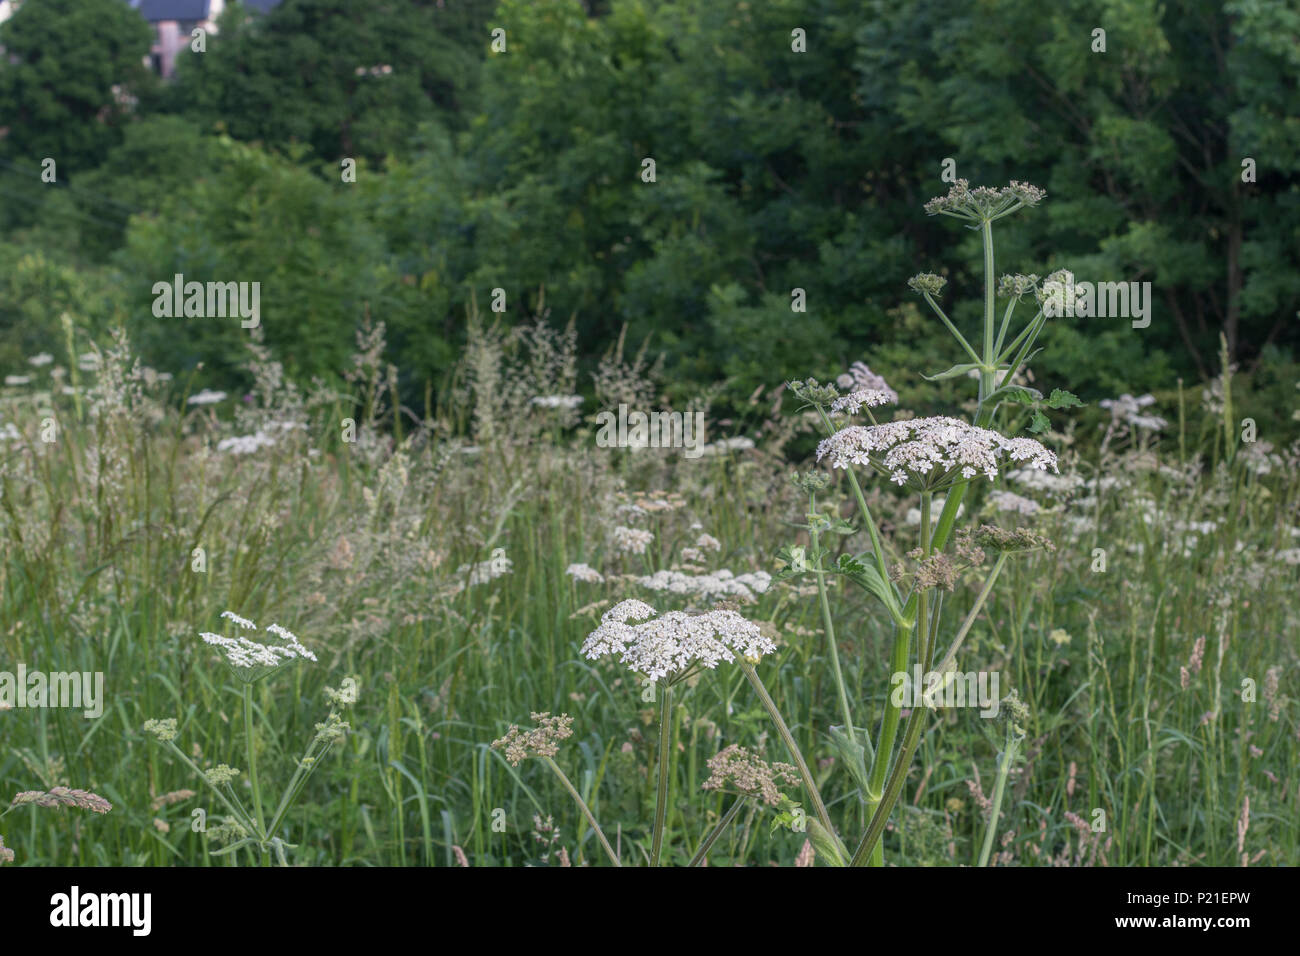 Hogweed Cow Parsnip. Mass of flowering Hogweed / Heracleum sphondylium plants in summertime meadow. Young spring hogweed shoots may be eaten with care Stock Photo